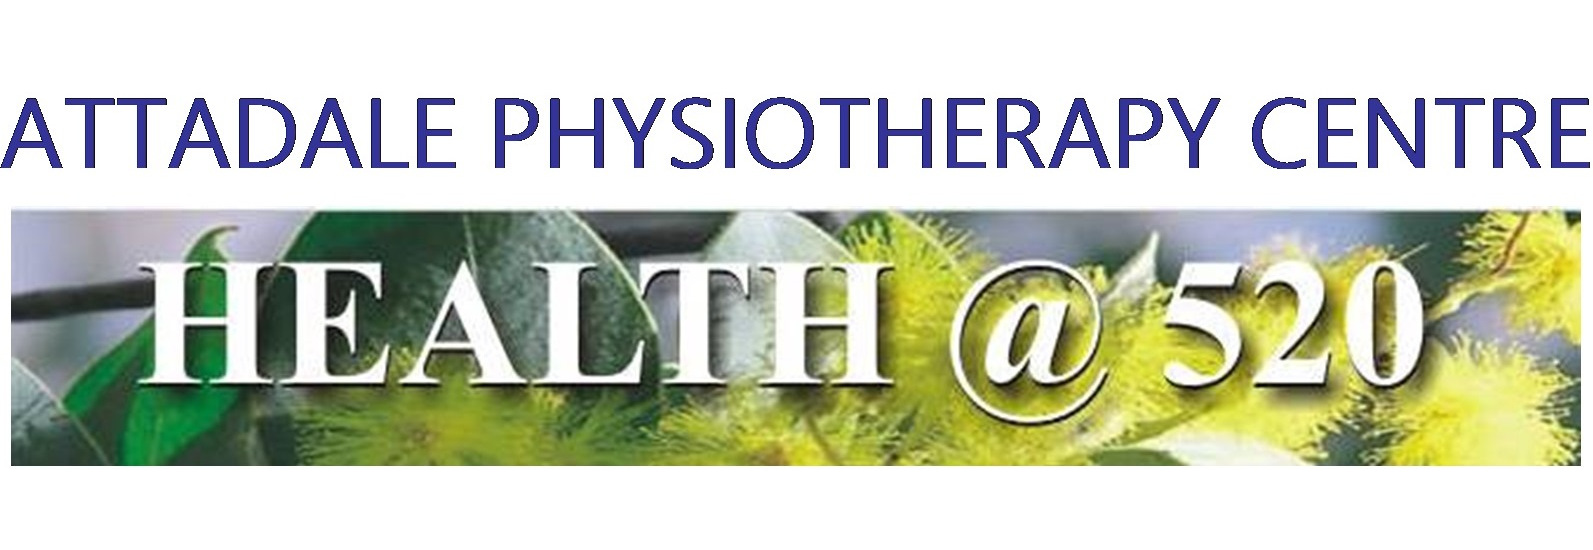 Attadale Physiotherapy Logo